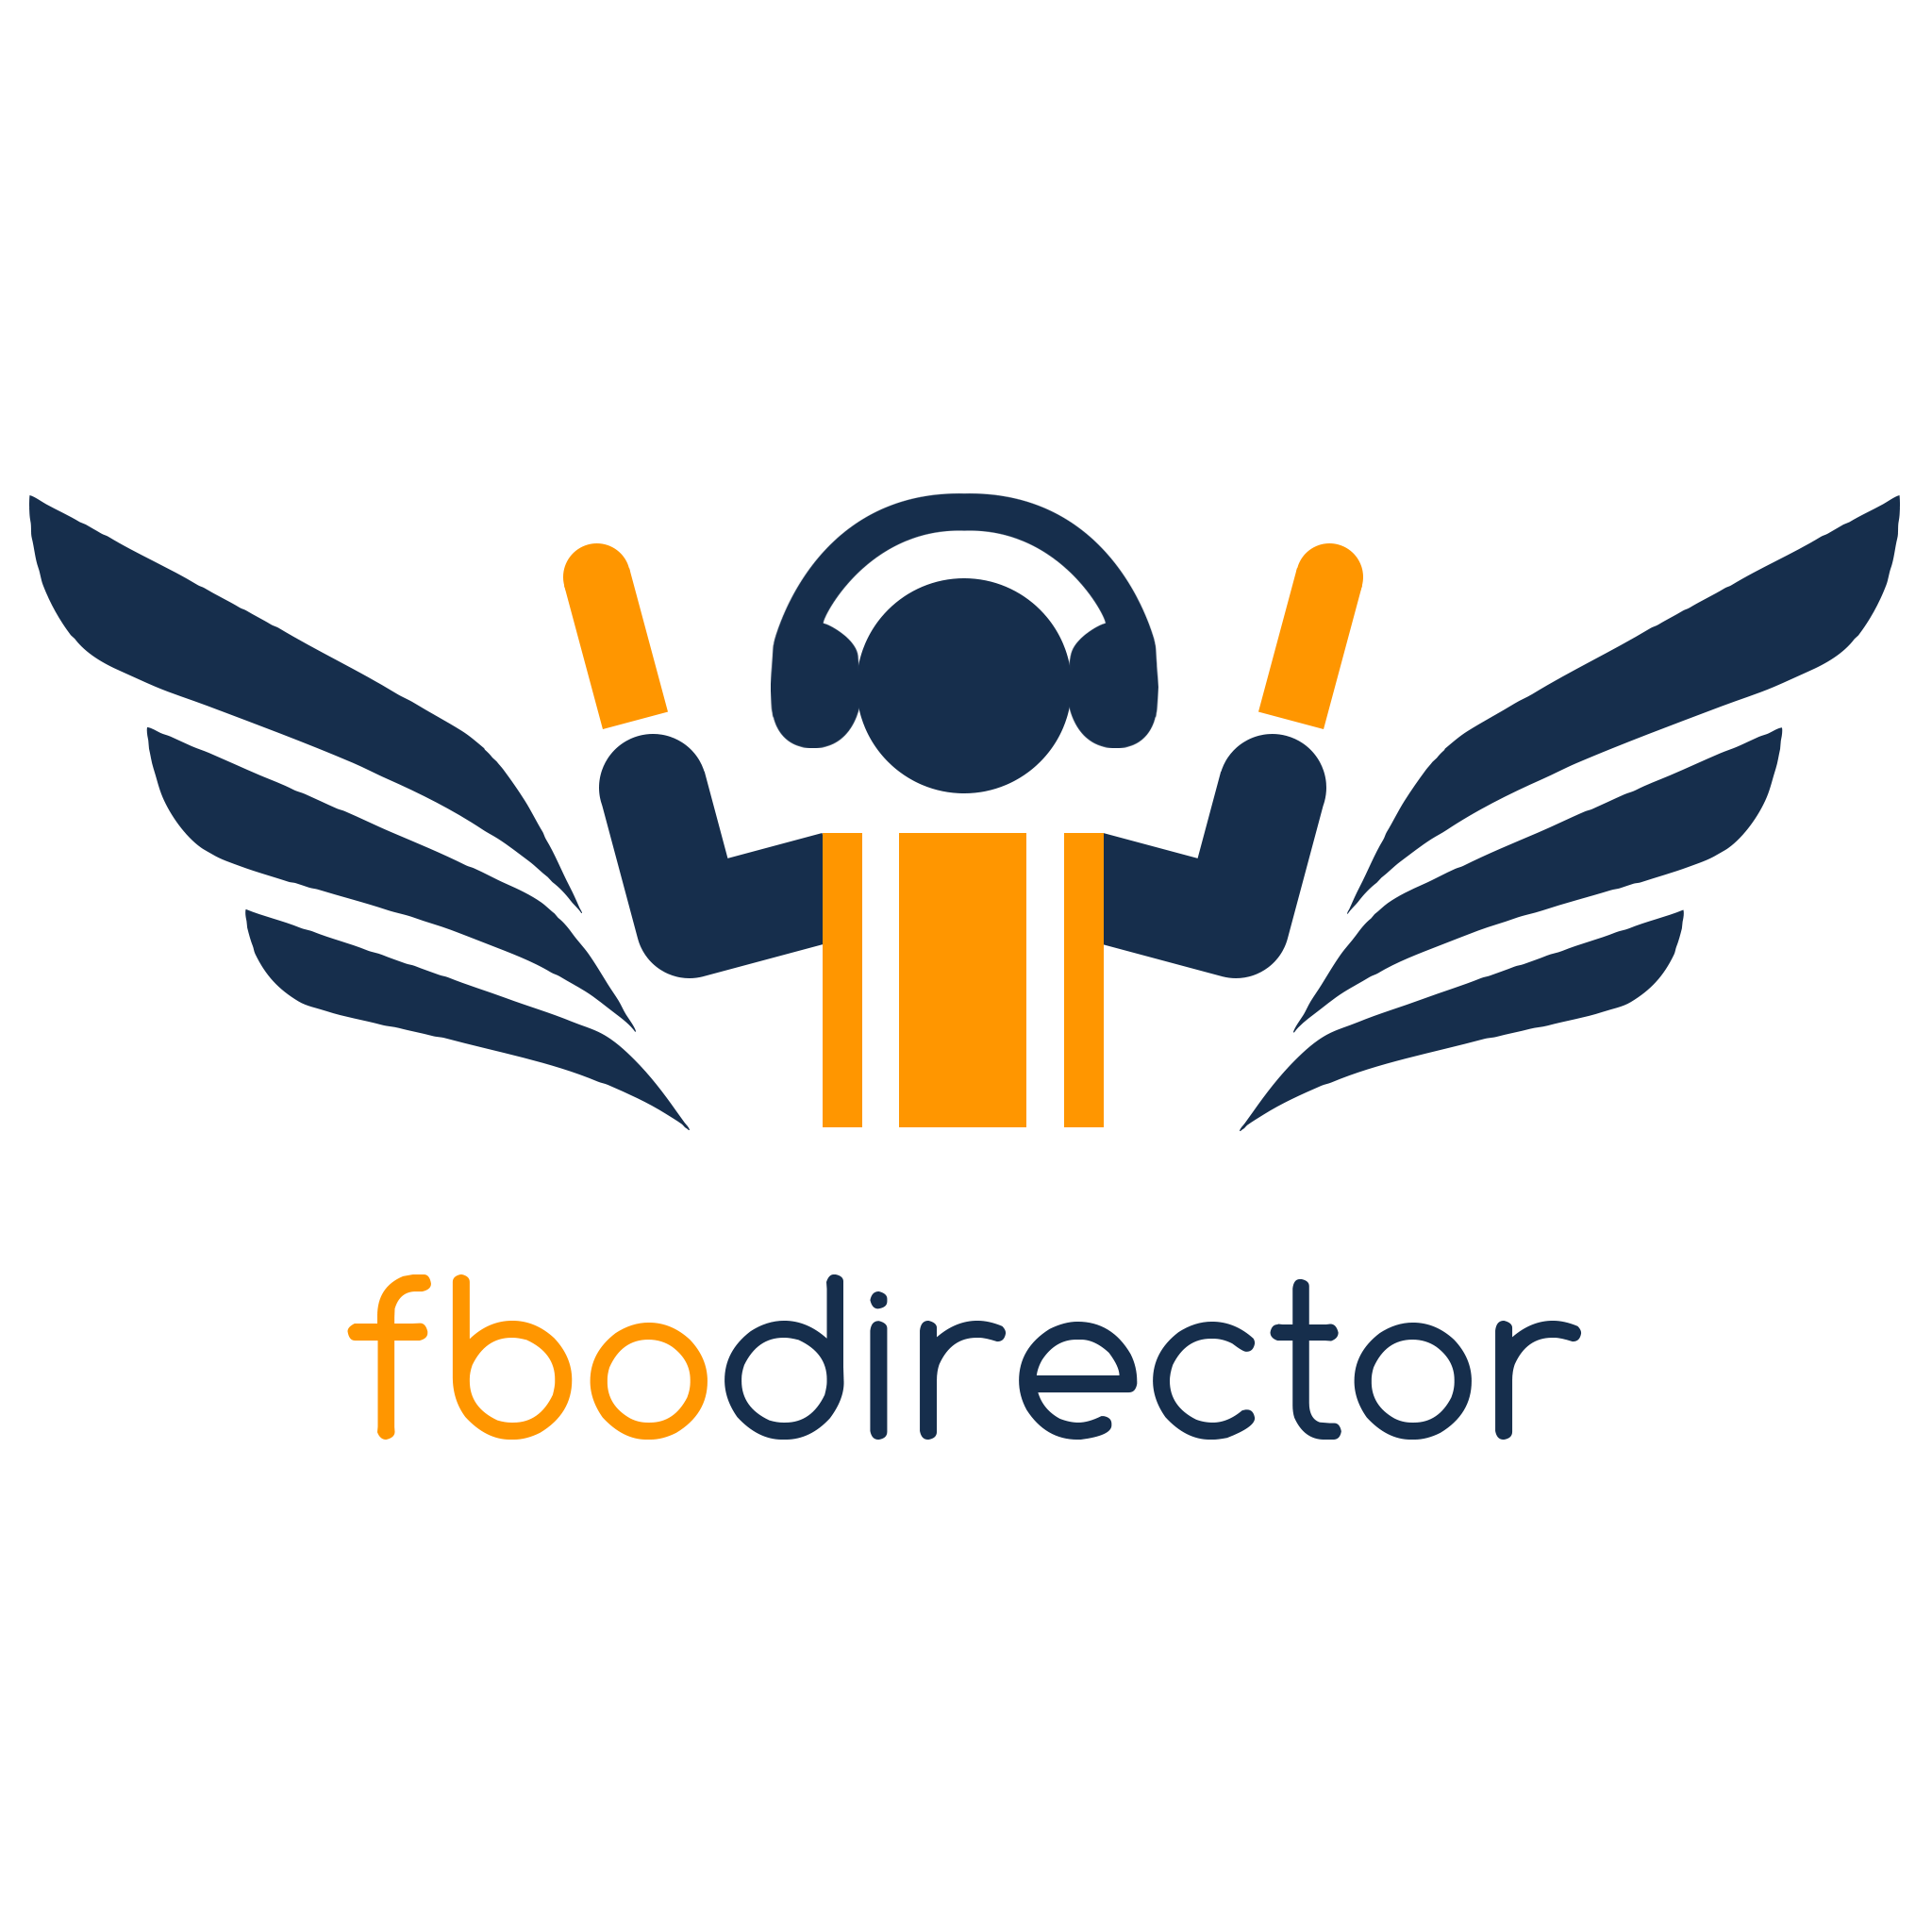 www.fbodirector.com is a greate application and a perfect example of licensing an invention